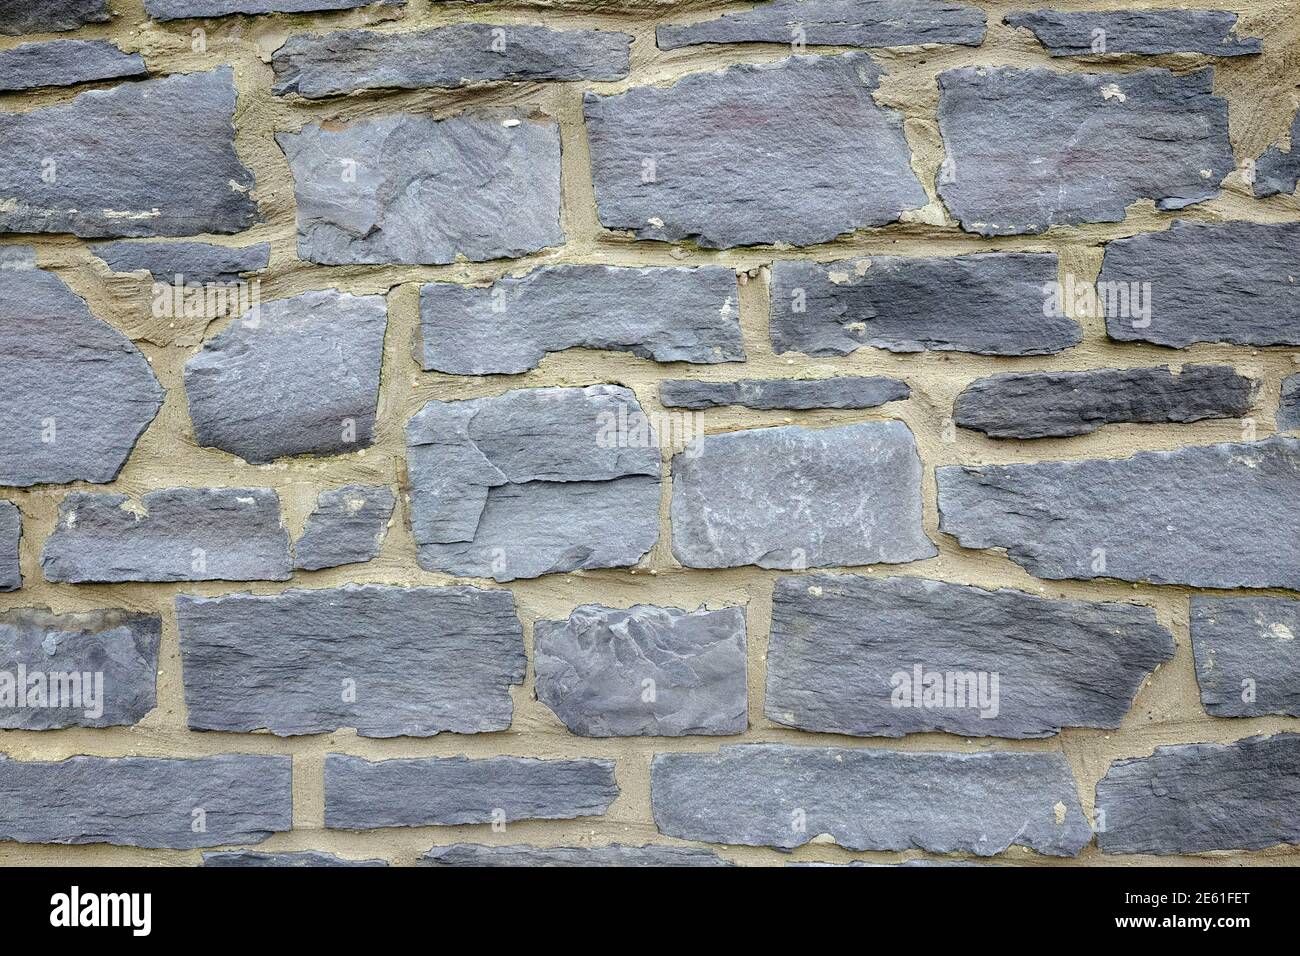 January 2021 - Stone wall details for background or texture - Portishead, North Somerset, UK Stock Photo